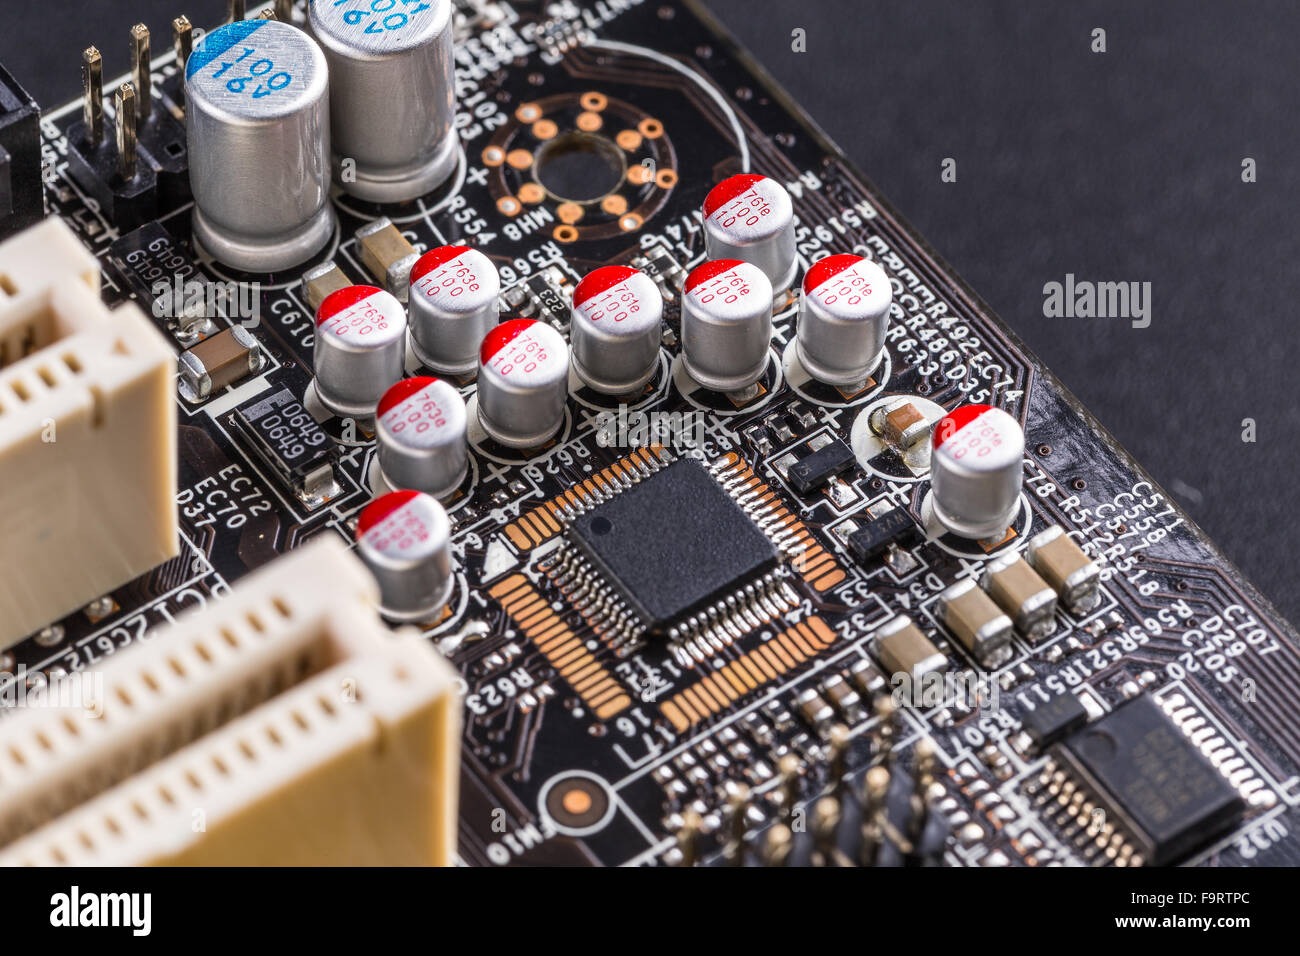 Microchips and condensers assembly on the circuit board Stock Photo